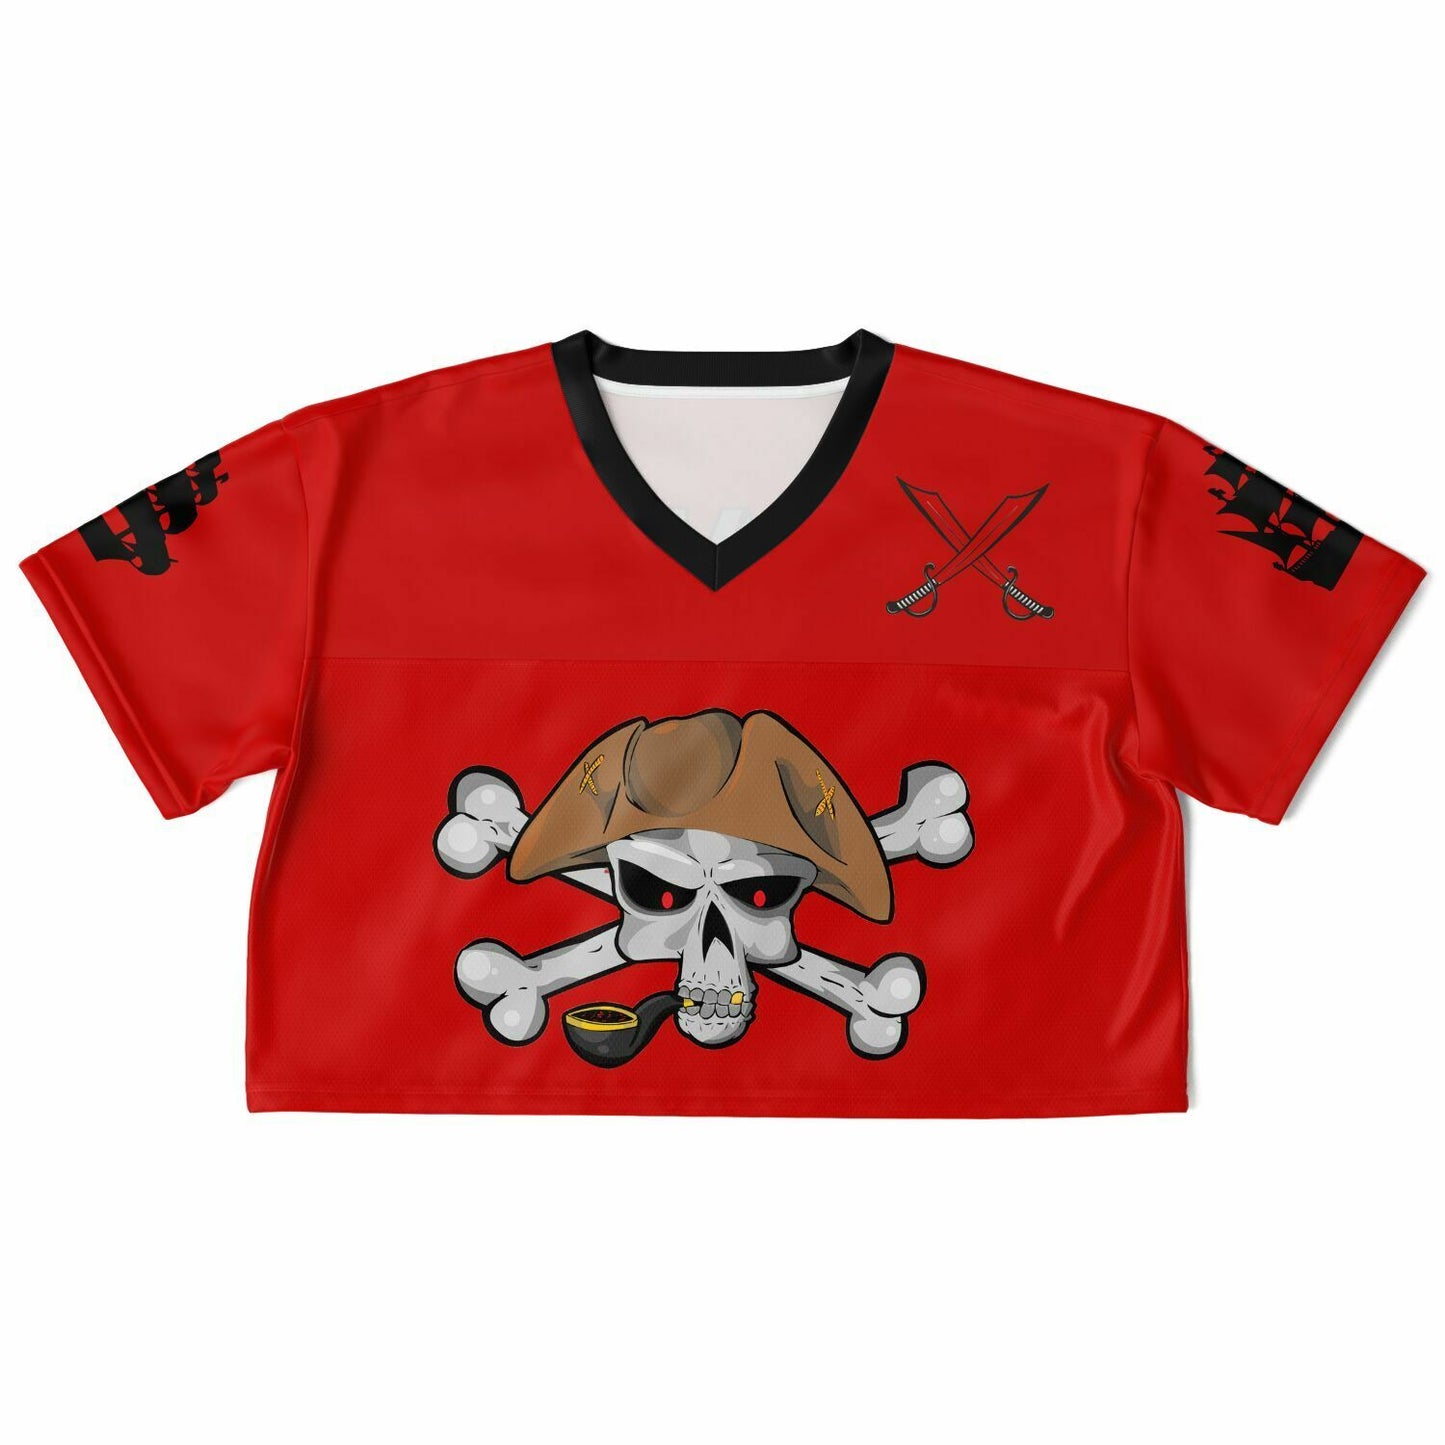 Are these Gasparilla jerseys available on the store? They are so